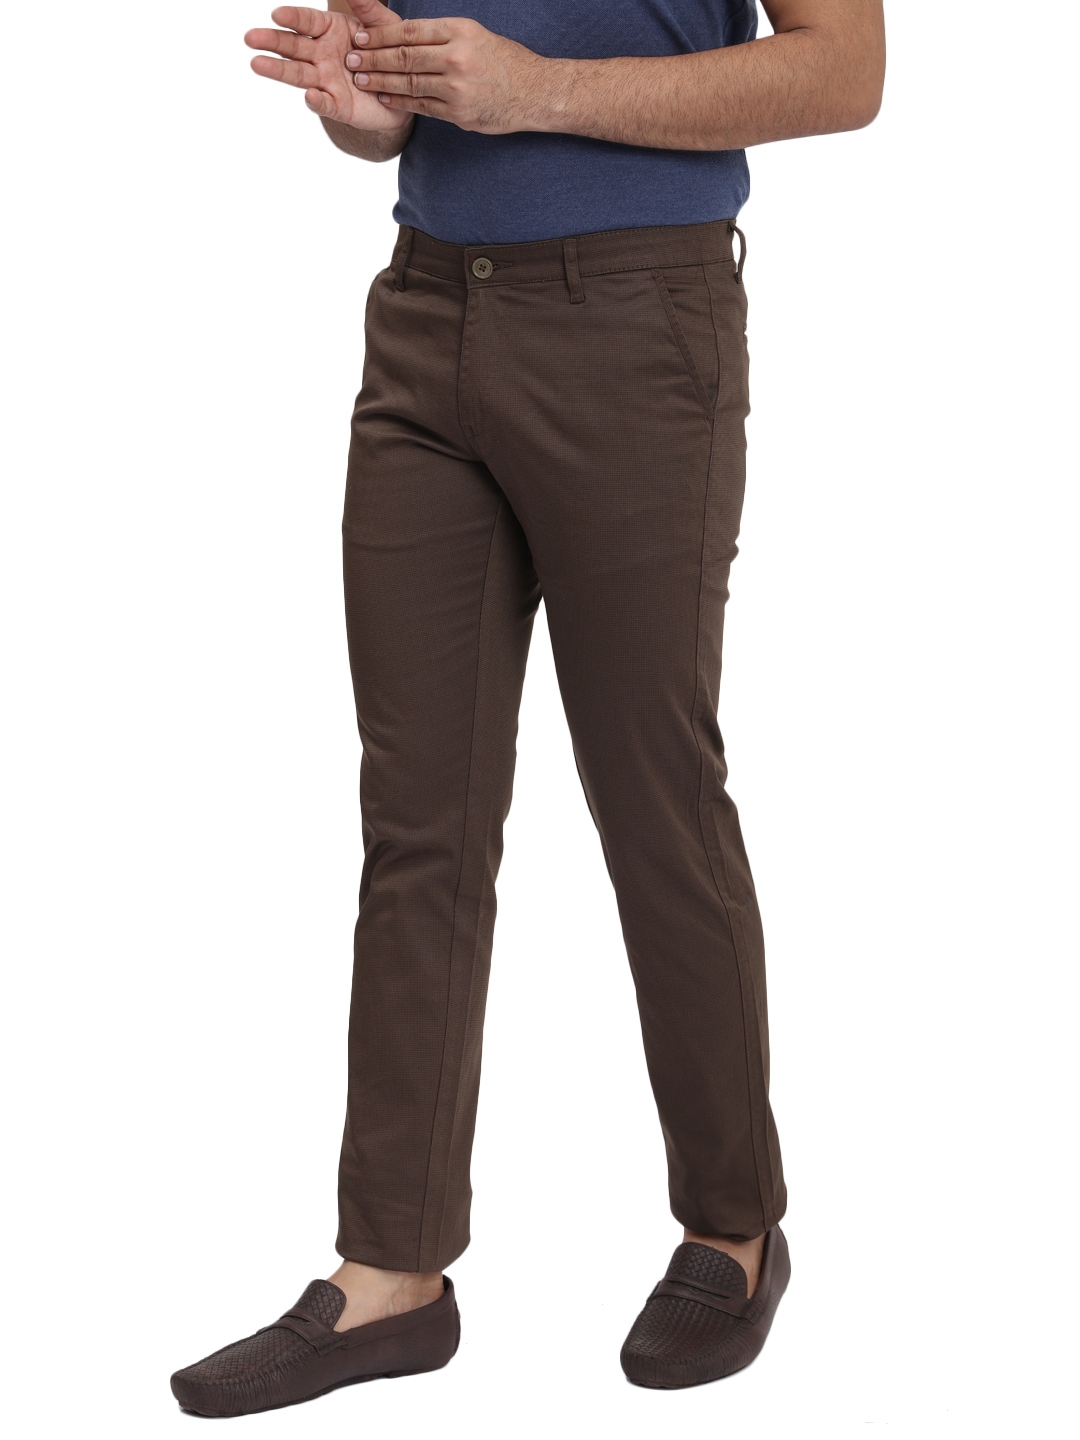 D'cot by Donear | D'cot by Donear Men's Brown Cotton Trousers 1